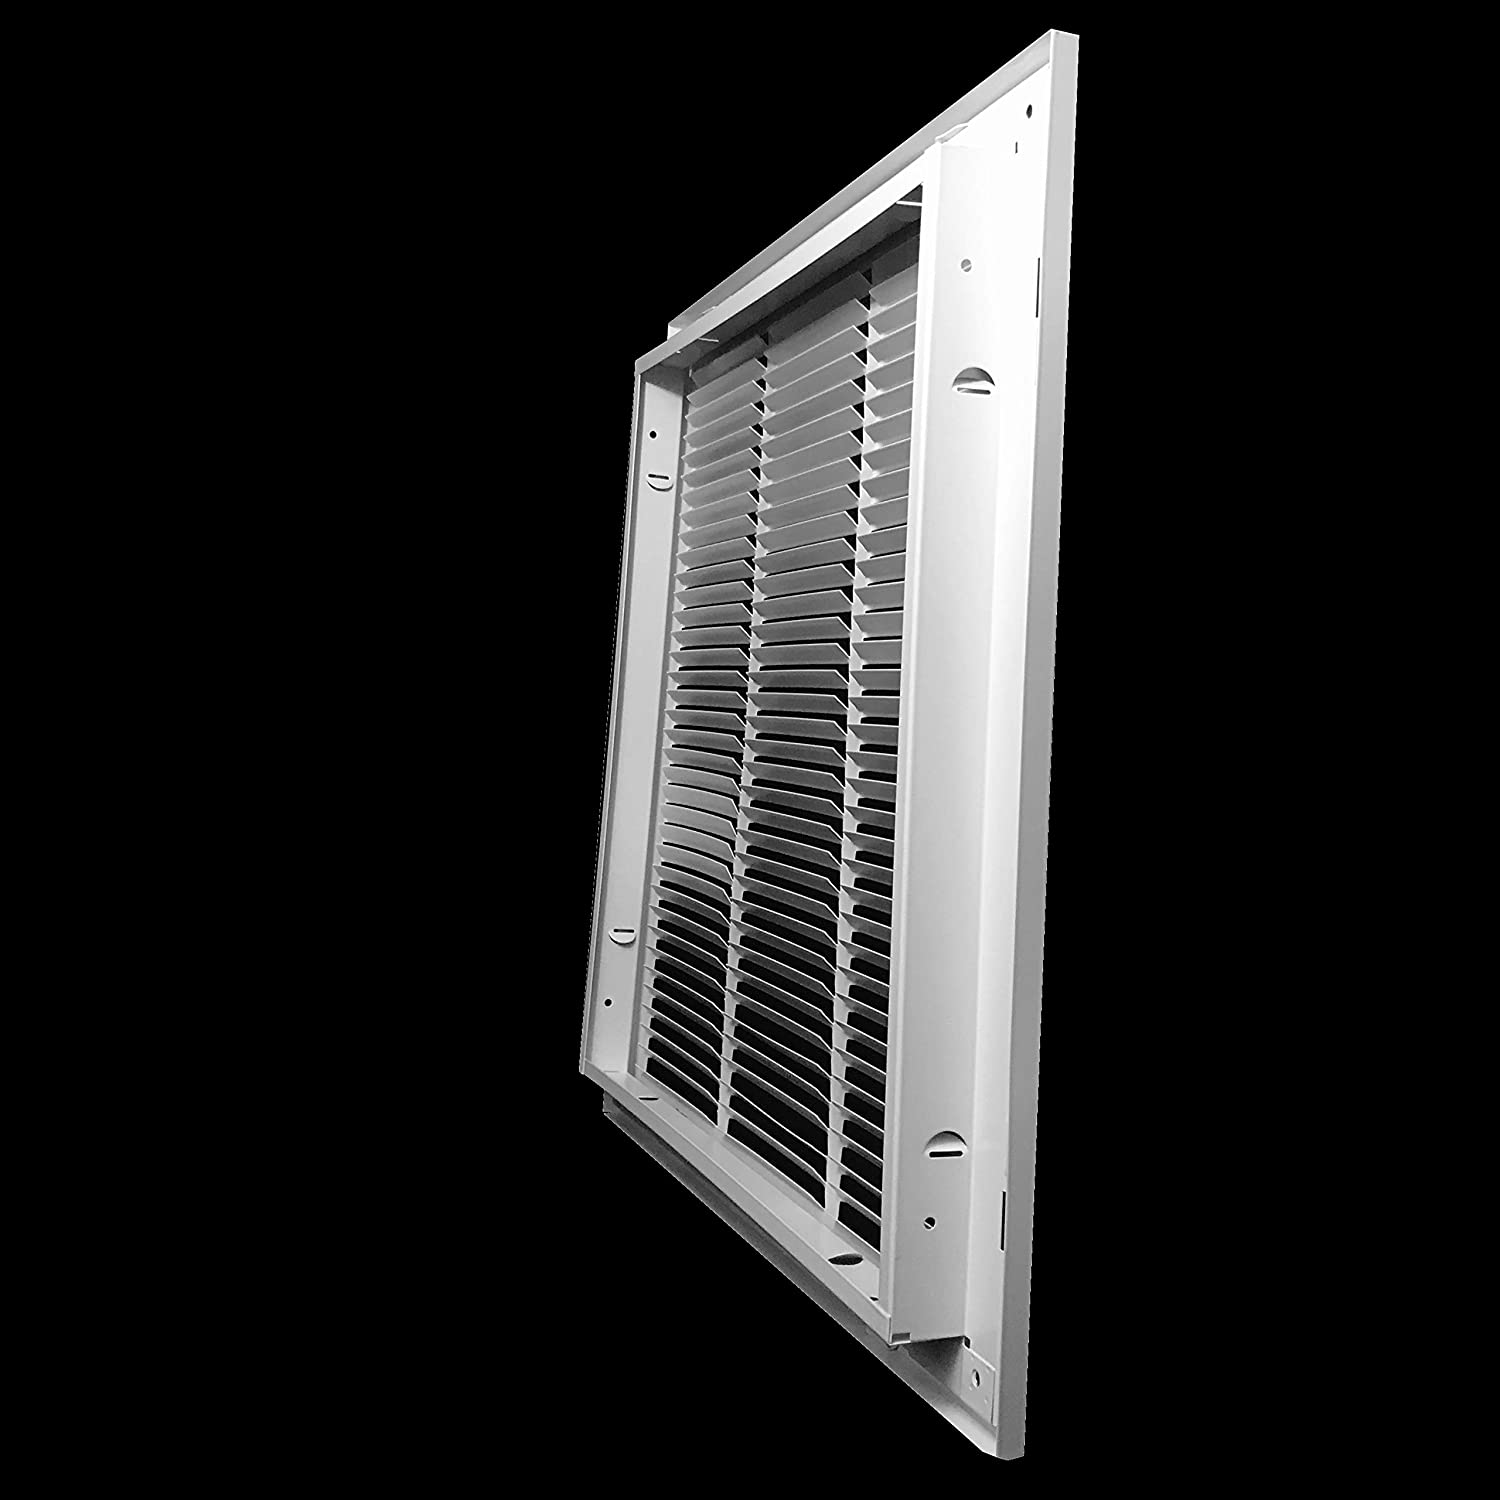 14" X 30" Duct Opening | Filter Included HD Steel Return Air Filter Grille for Sidewall and Ceiling